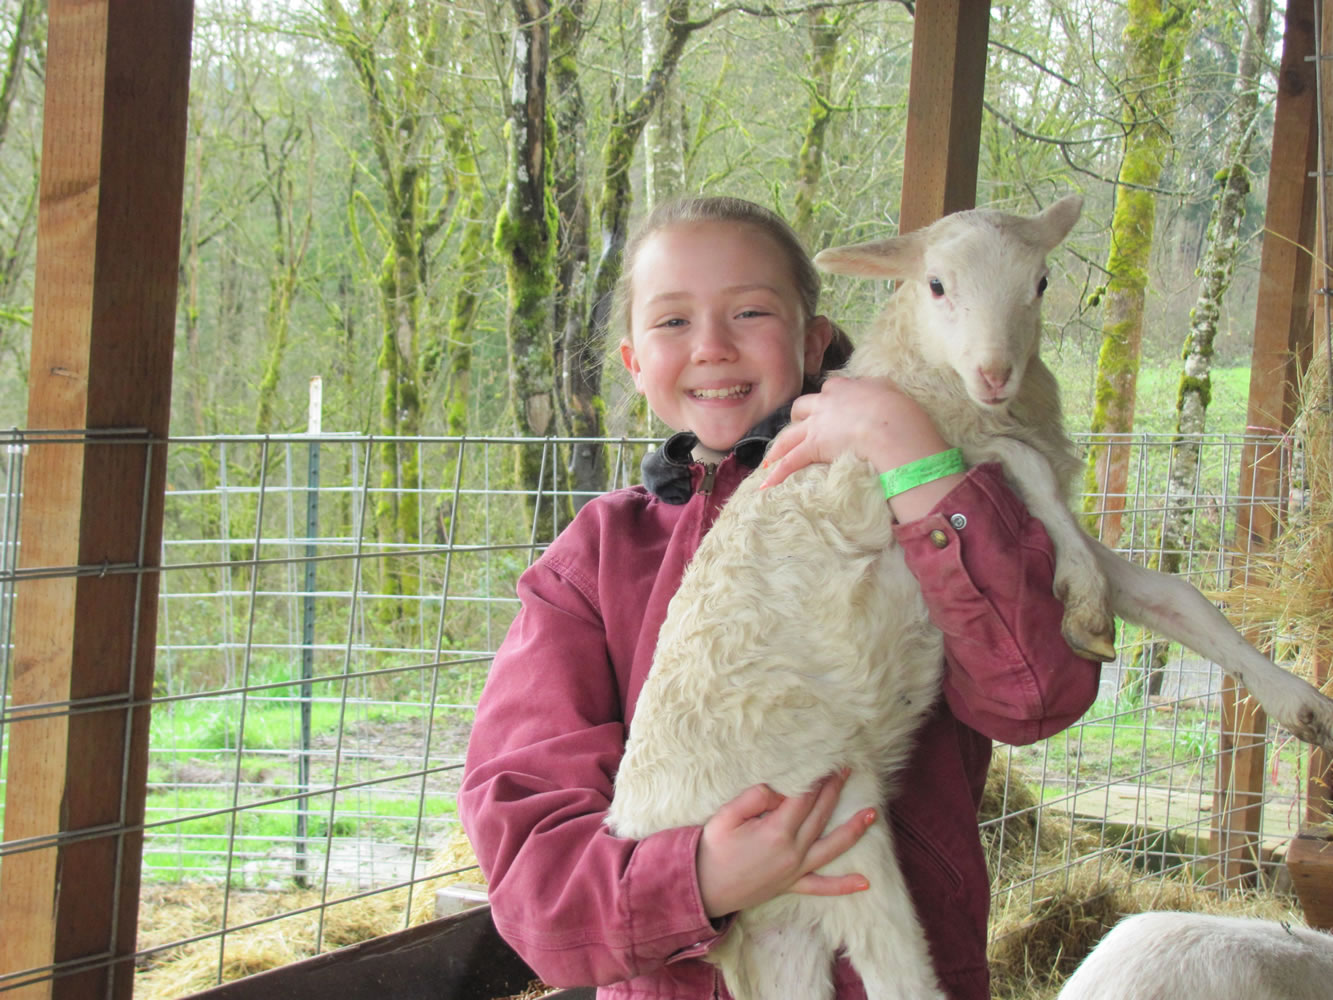 Kiara holds Tina, one of her sheep, at the family home in Washougal.